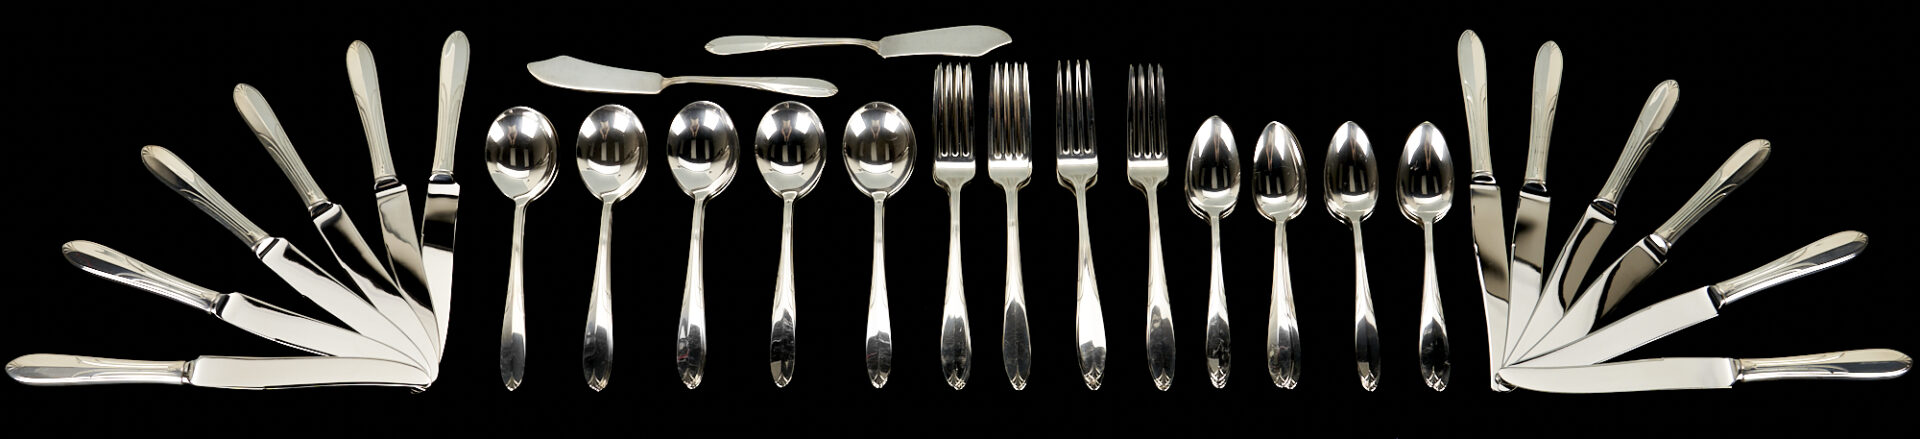 Lot 438: 52 Pieces National Silver Company Flatware, Overture Pattern